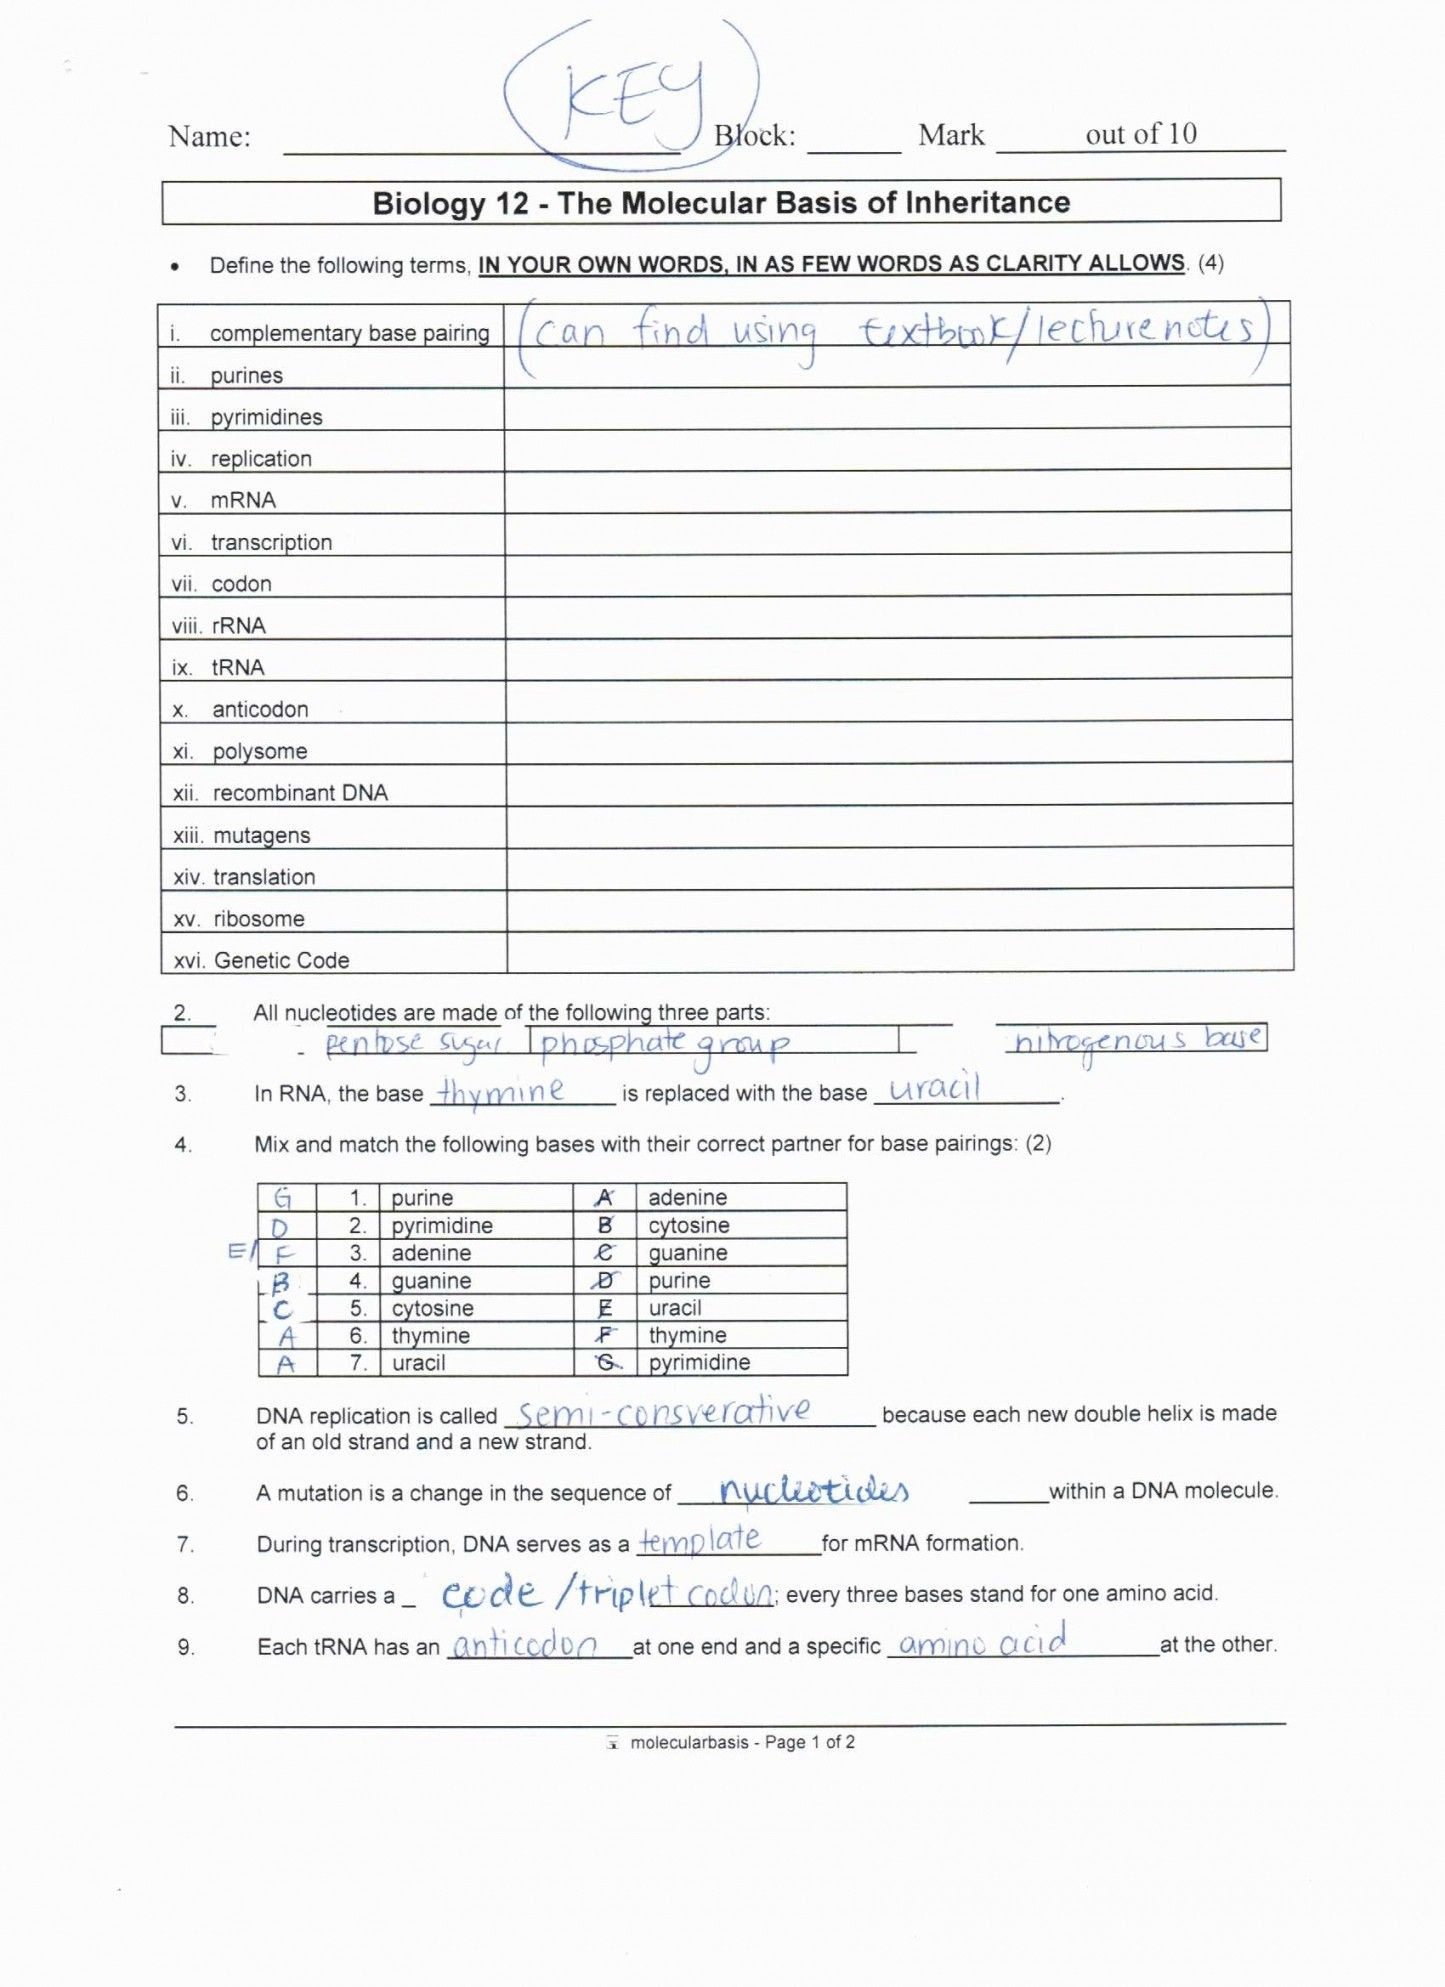 dna-the-molecule-of-heredity-worksheet-answers-db-excel